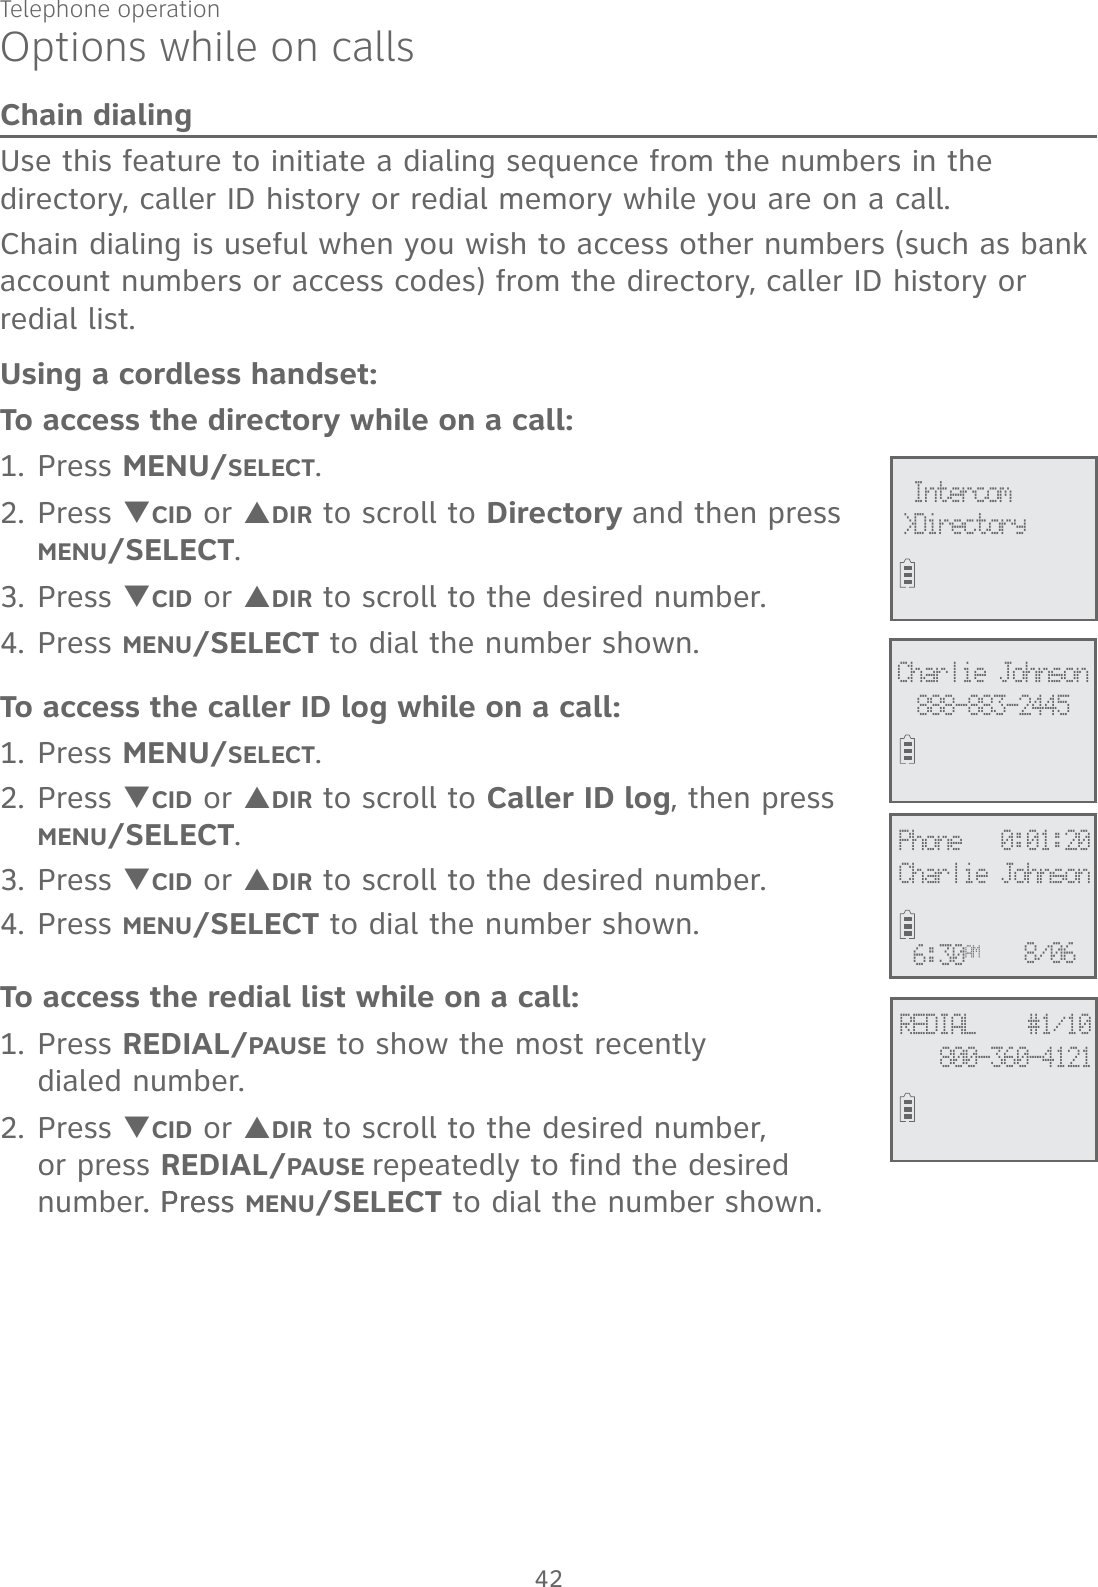 Telephone operation42Options while on callsChain dialingUse this feature to initiate a dialing sequence from the numbers in the directory, caller ID history or redial memory while you are on a call. Chain dialing is useful when you wish to access other numbers (such as bank account numbers or access codes) from the directory, caller ID history or redial list. Using a cordless handset:To access the directory while on a call:1. Press MENU/SELECT.2. Press TCID or SDIR to scroll to Directory and then press MENU/SELECT. 3. Press TCID or SDIR to scroll to the desired number. 4. Press MENU/SELECT to dial the number shown. To access the caller ID log while on a call:1. Press MENU/SELECT. 2. Press TCID or SDIR to scroll to Caller ID log, then press  MENU/SELECT.3. Press TCID or SDIR to scroll to the desired number. 4. Press MENU/SELECT to dial the number shown. To access the redial list while on a call:1. Press REDIAL/PAUSE to show the most recently  dialed number. 2. Press TCID or SDIR to scroll to the desired number,  or press REDIAL/PAUSE repeatedly to find the desired number. Press. Press MENU/SELECT to dial the number shown.&gt;Directory Intercom888-883-2445Charlie JohnsonREDIAL    #1/10800-360-4121Phone   0:01:20Charlie Johnson6:30AM8/06